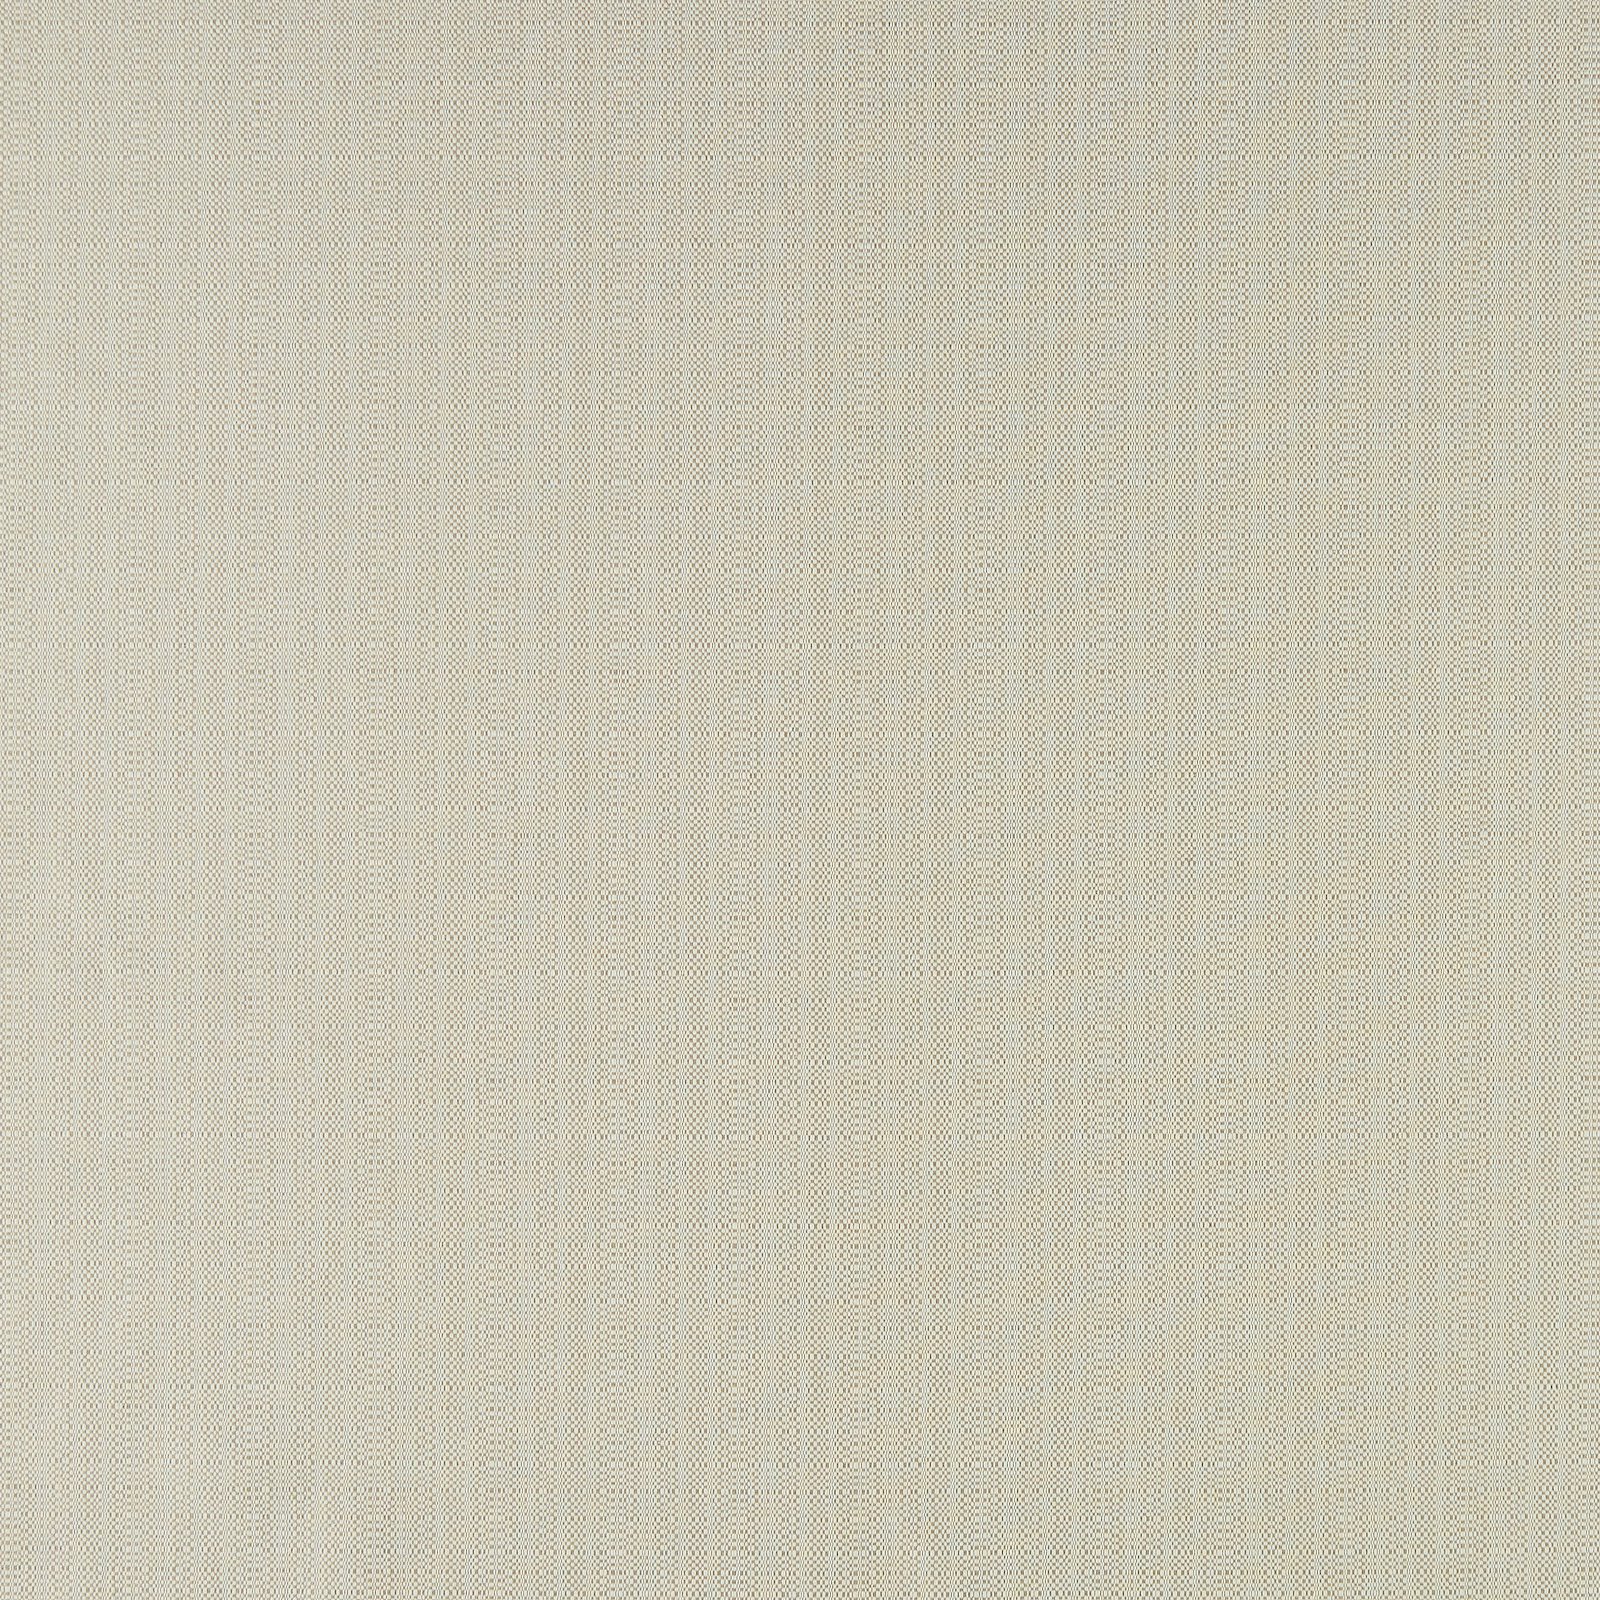 Recycled jacquard offwhite/sand mönster 780943_pack_sp